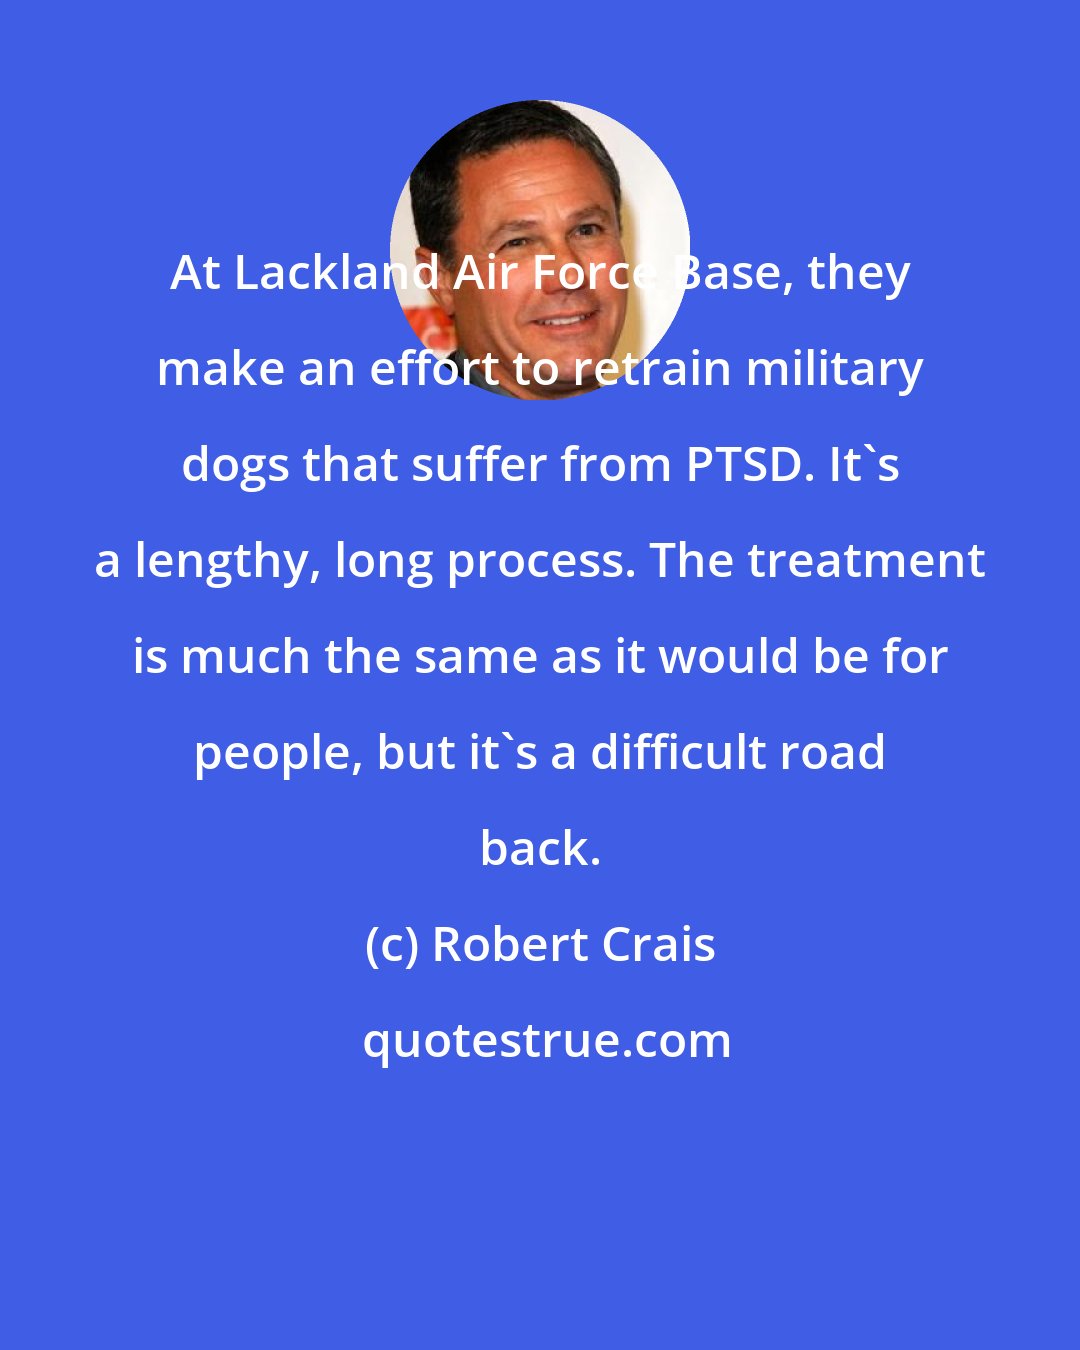 Robert Crais: At Lackland Air Force Base, they make an effort to retrain military dogs that suffer from PTSD. It's a lengthy, long process. The treatment is much the same as it would be for people, but it's a difficult road back.